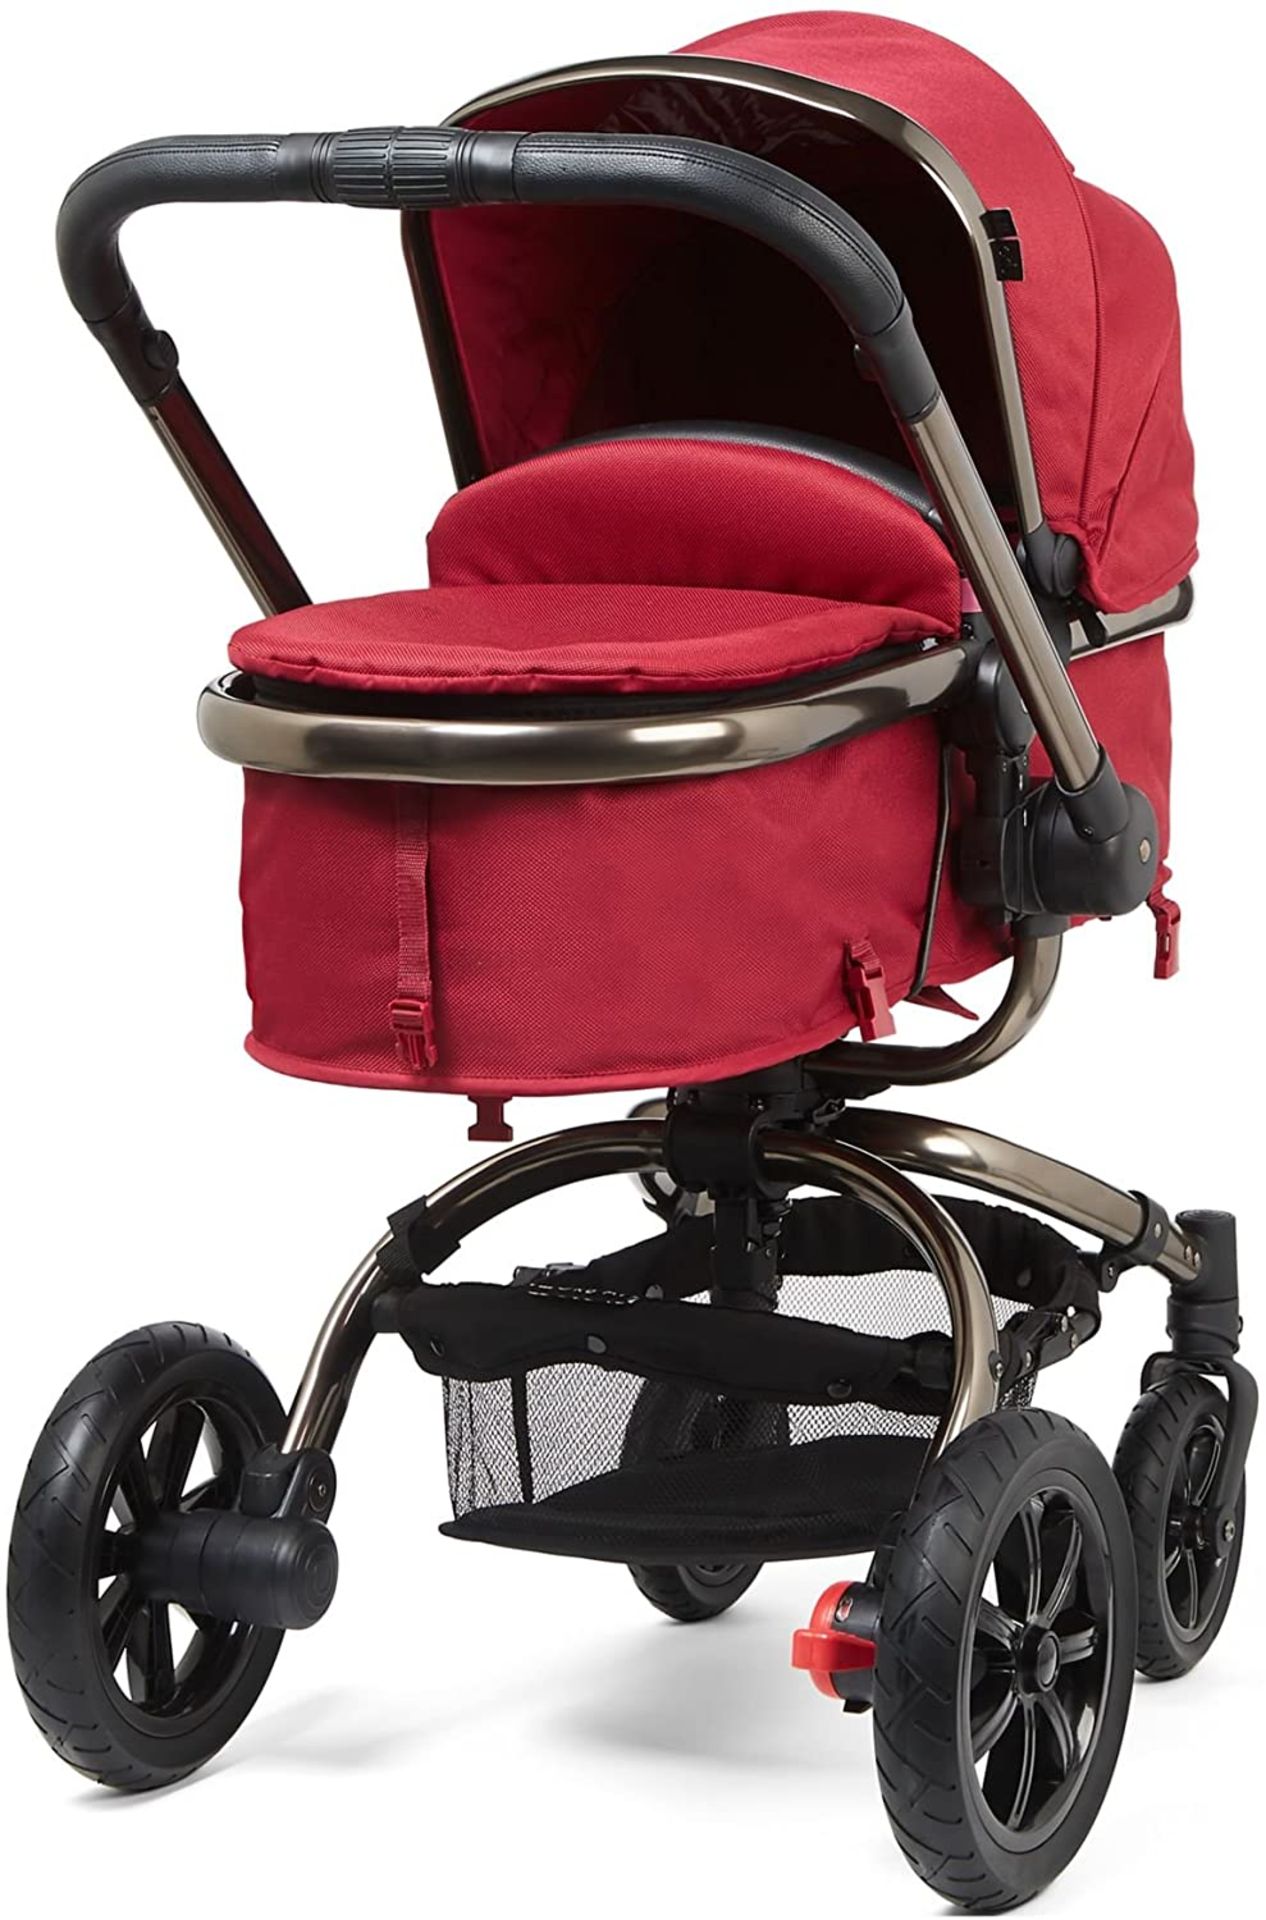 Mothercare Orb All-Terrain Green Baby Pushchair Ex-Display Rrp £299.99